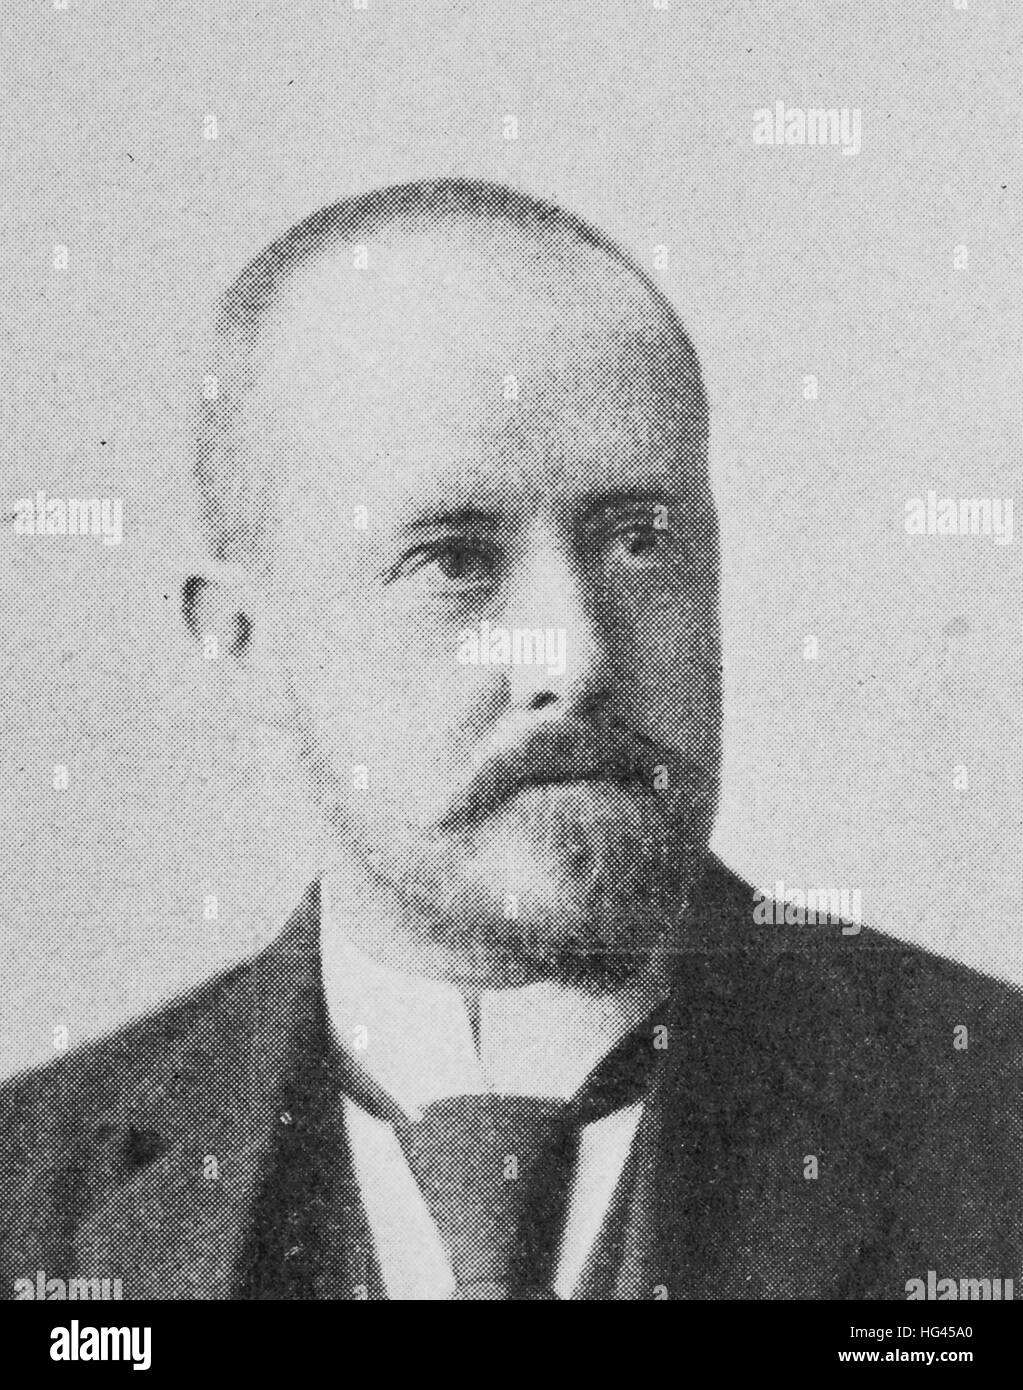 Gustav Falke, 11 January 1853 - 8 February 1916, was a German writer, reproduction of a photo from the year 1895, digital improved Stock Photo